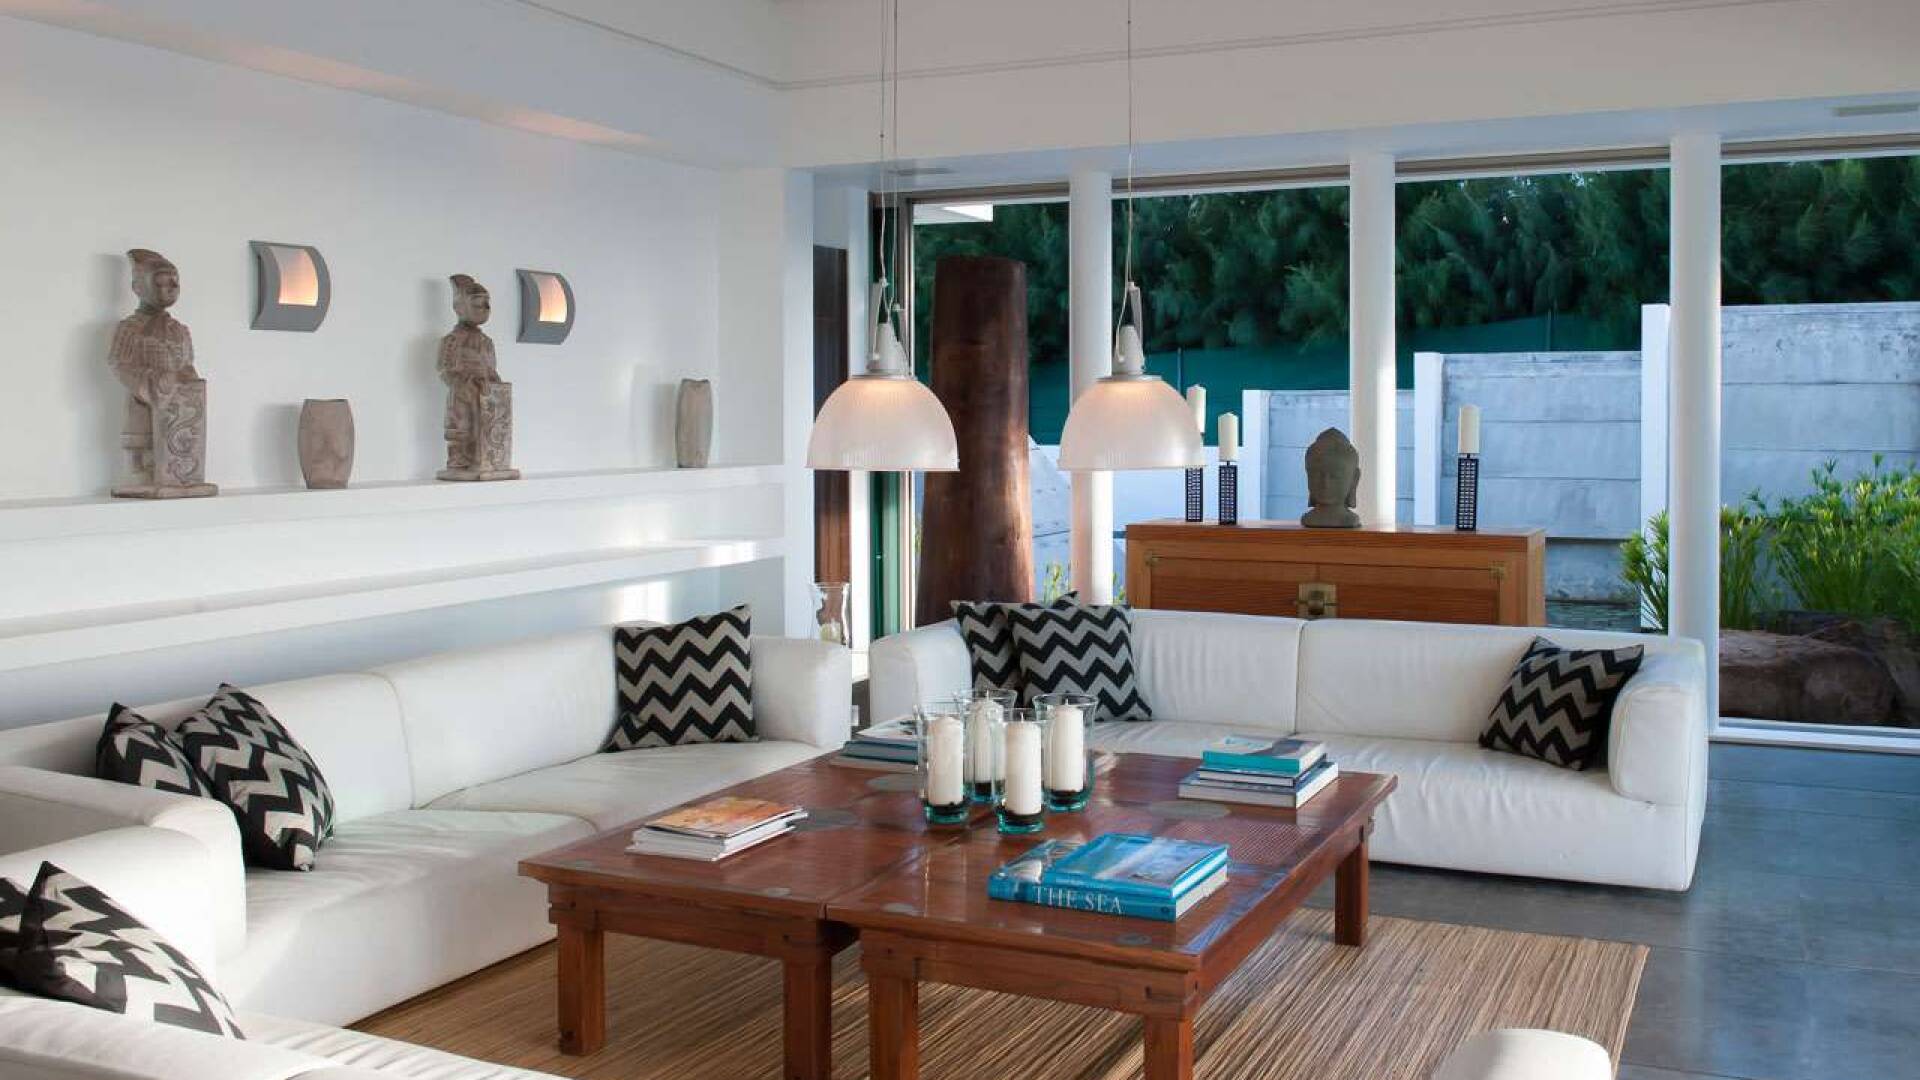 Living Room at WV PYR, Pointe Milou, St. Barthelemy